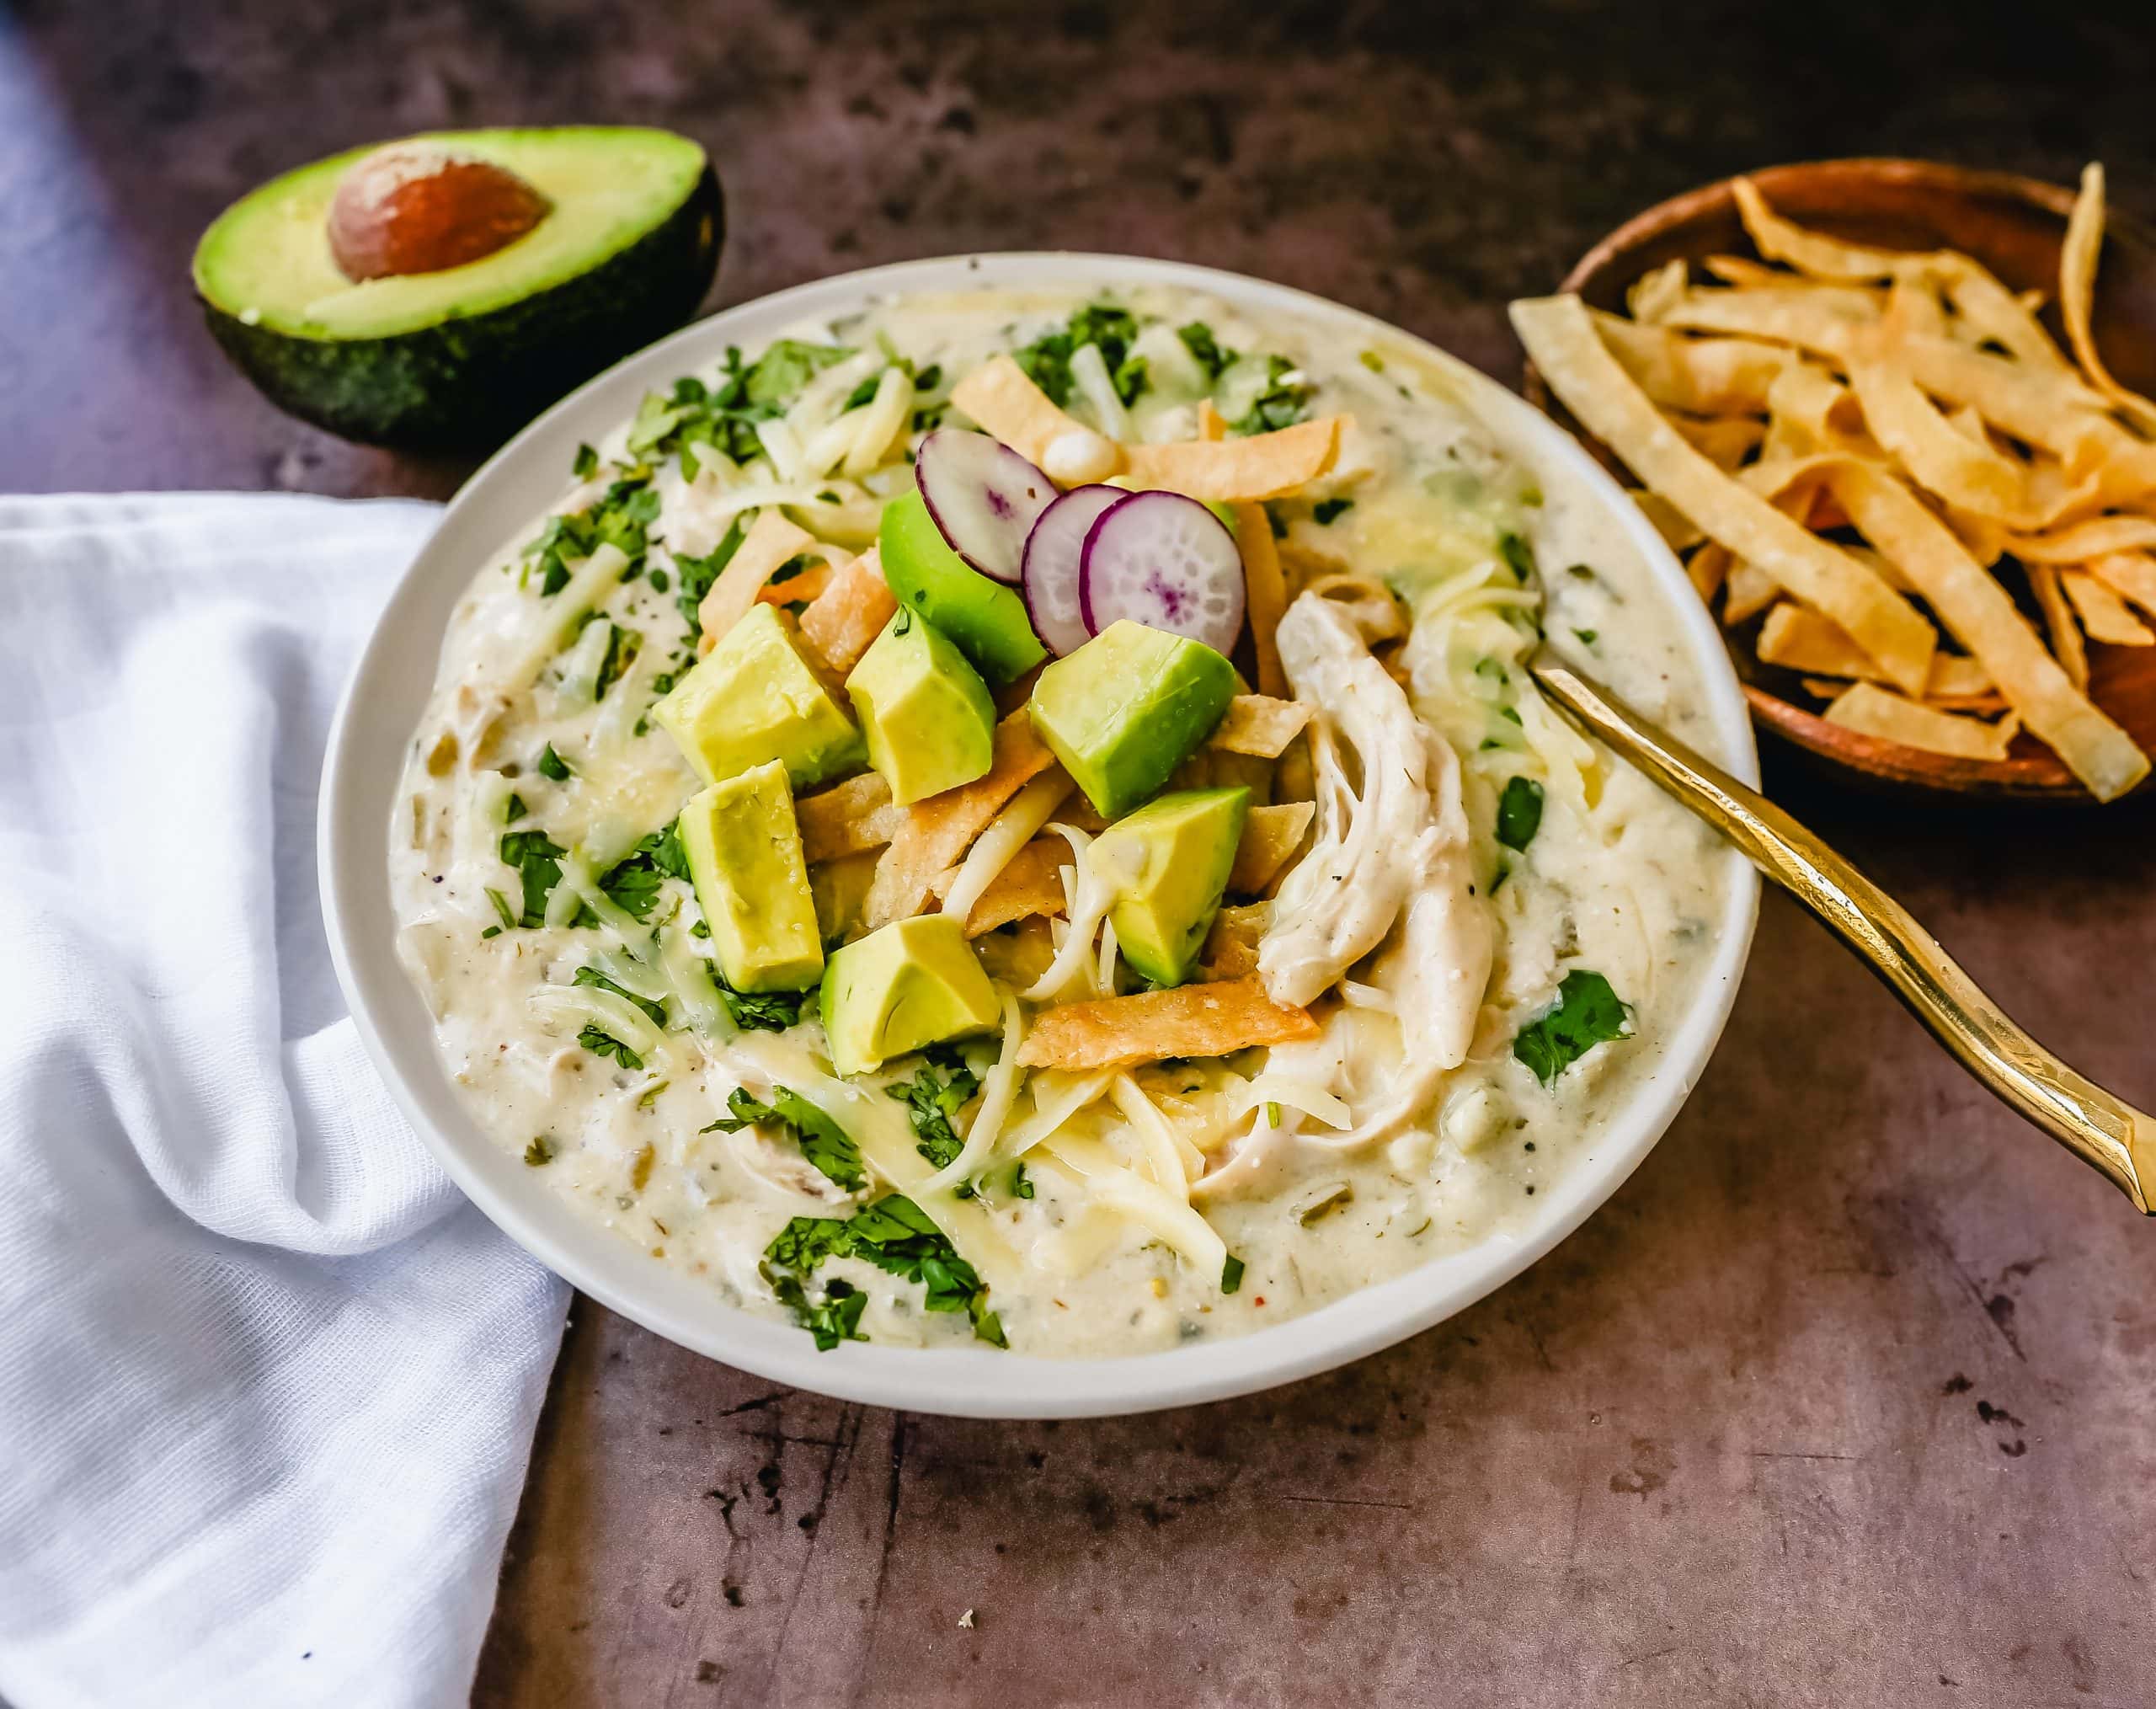 This Green Chile Chicken Enchilada Soup is made with tender chicken, green enchilada sauce, green chilies, cream cheese all in a chicken broth and topped with homemade fried tortilla strips, fresh avocado, cilantro, and Monterey Jack cheese. This is the most flavor-packed creamy green chicken enchilada soup recipe.